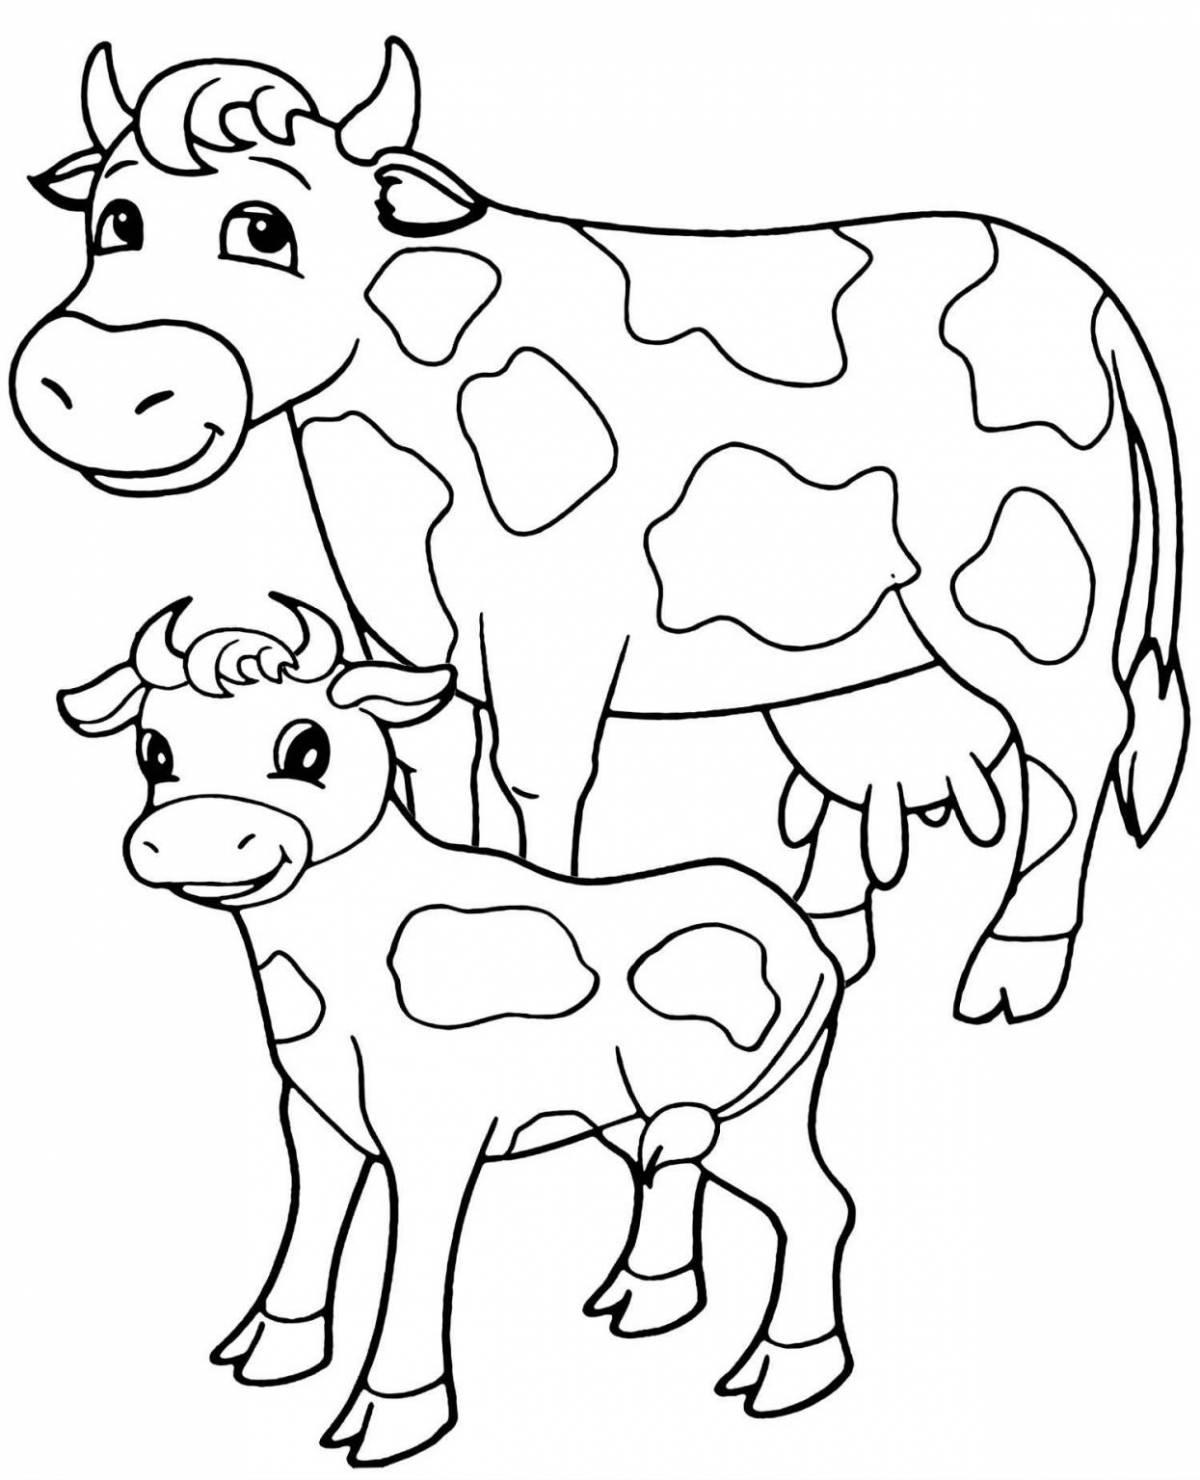 Rainbow cow drawing for kids